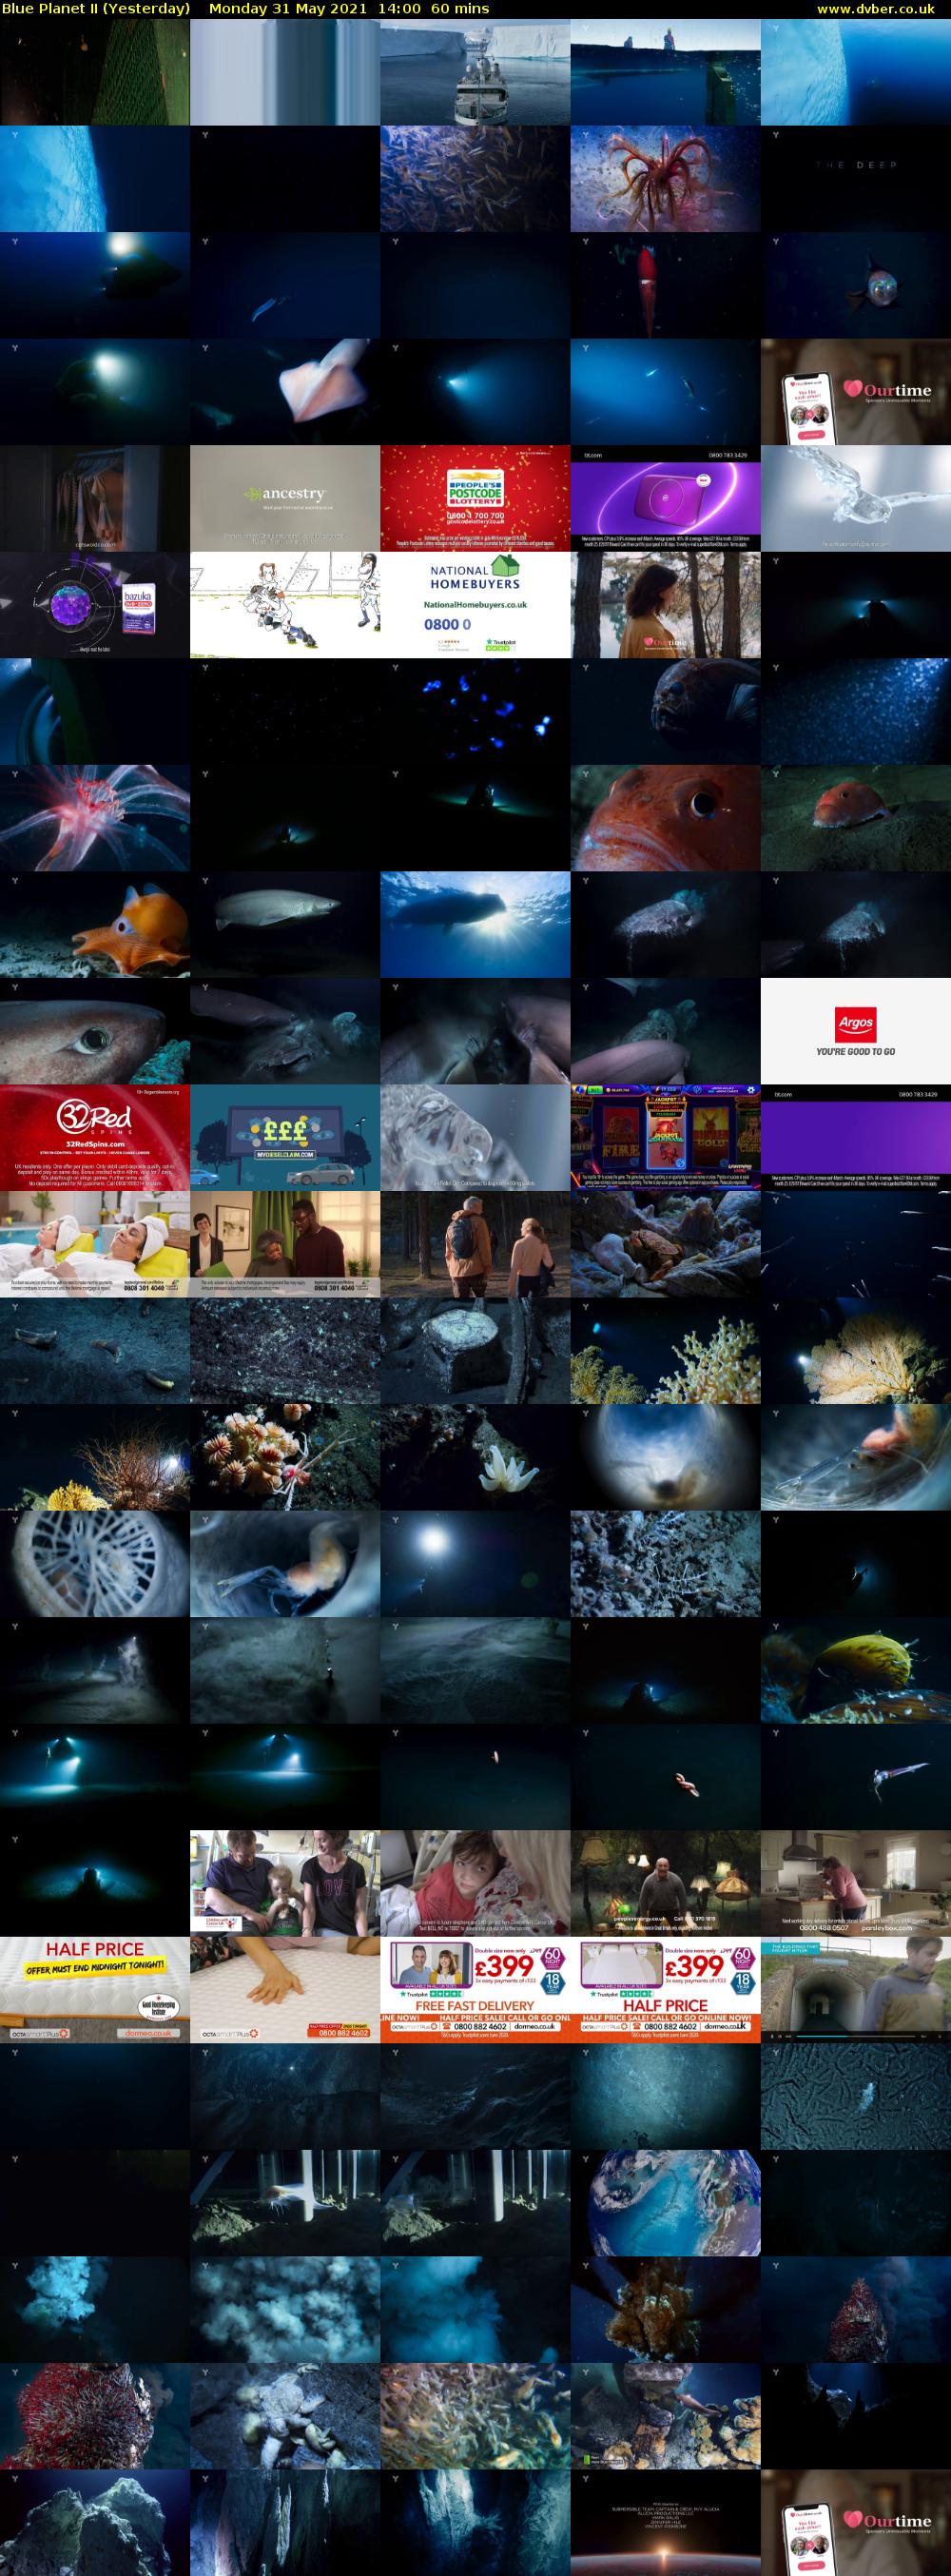 Blue Planet II (Yesterday) Monday 31 May 2021 14:00 - 15:00